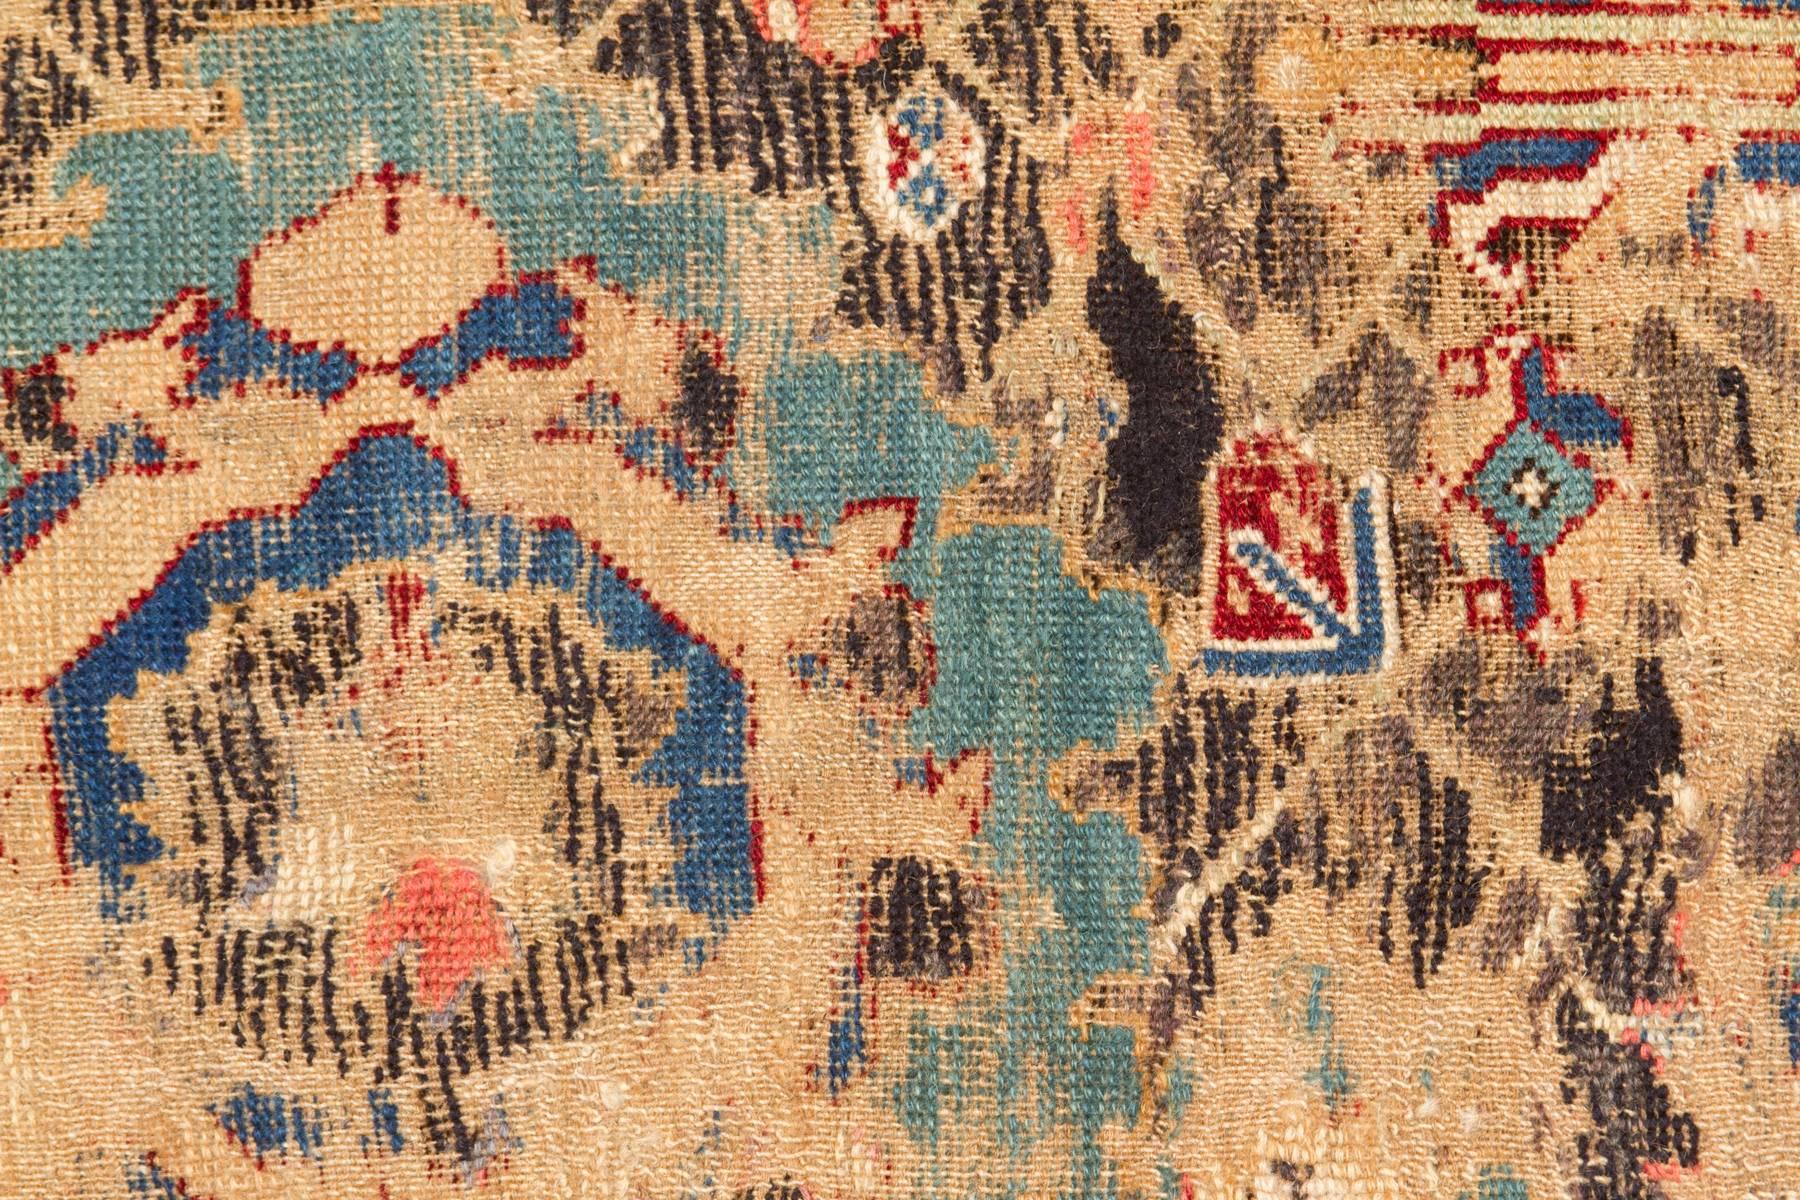 Coming from the 1700's, this is an impressive wool fragment. From the late 17th, early 18th century, this fragment is  made in the Shusha region of the Nagorno-Karabakh in the South Caucuses.  The vibrant red insect dye Lac is common to see used in